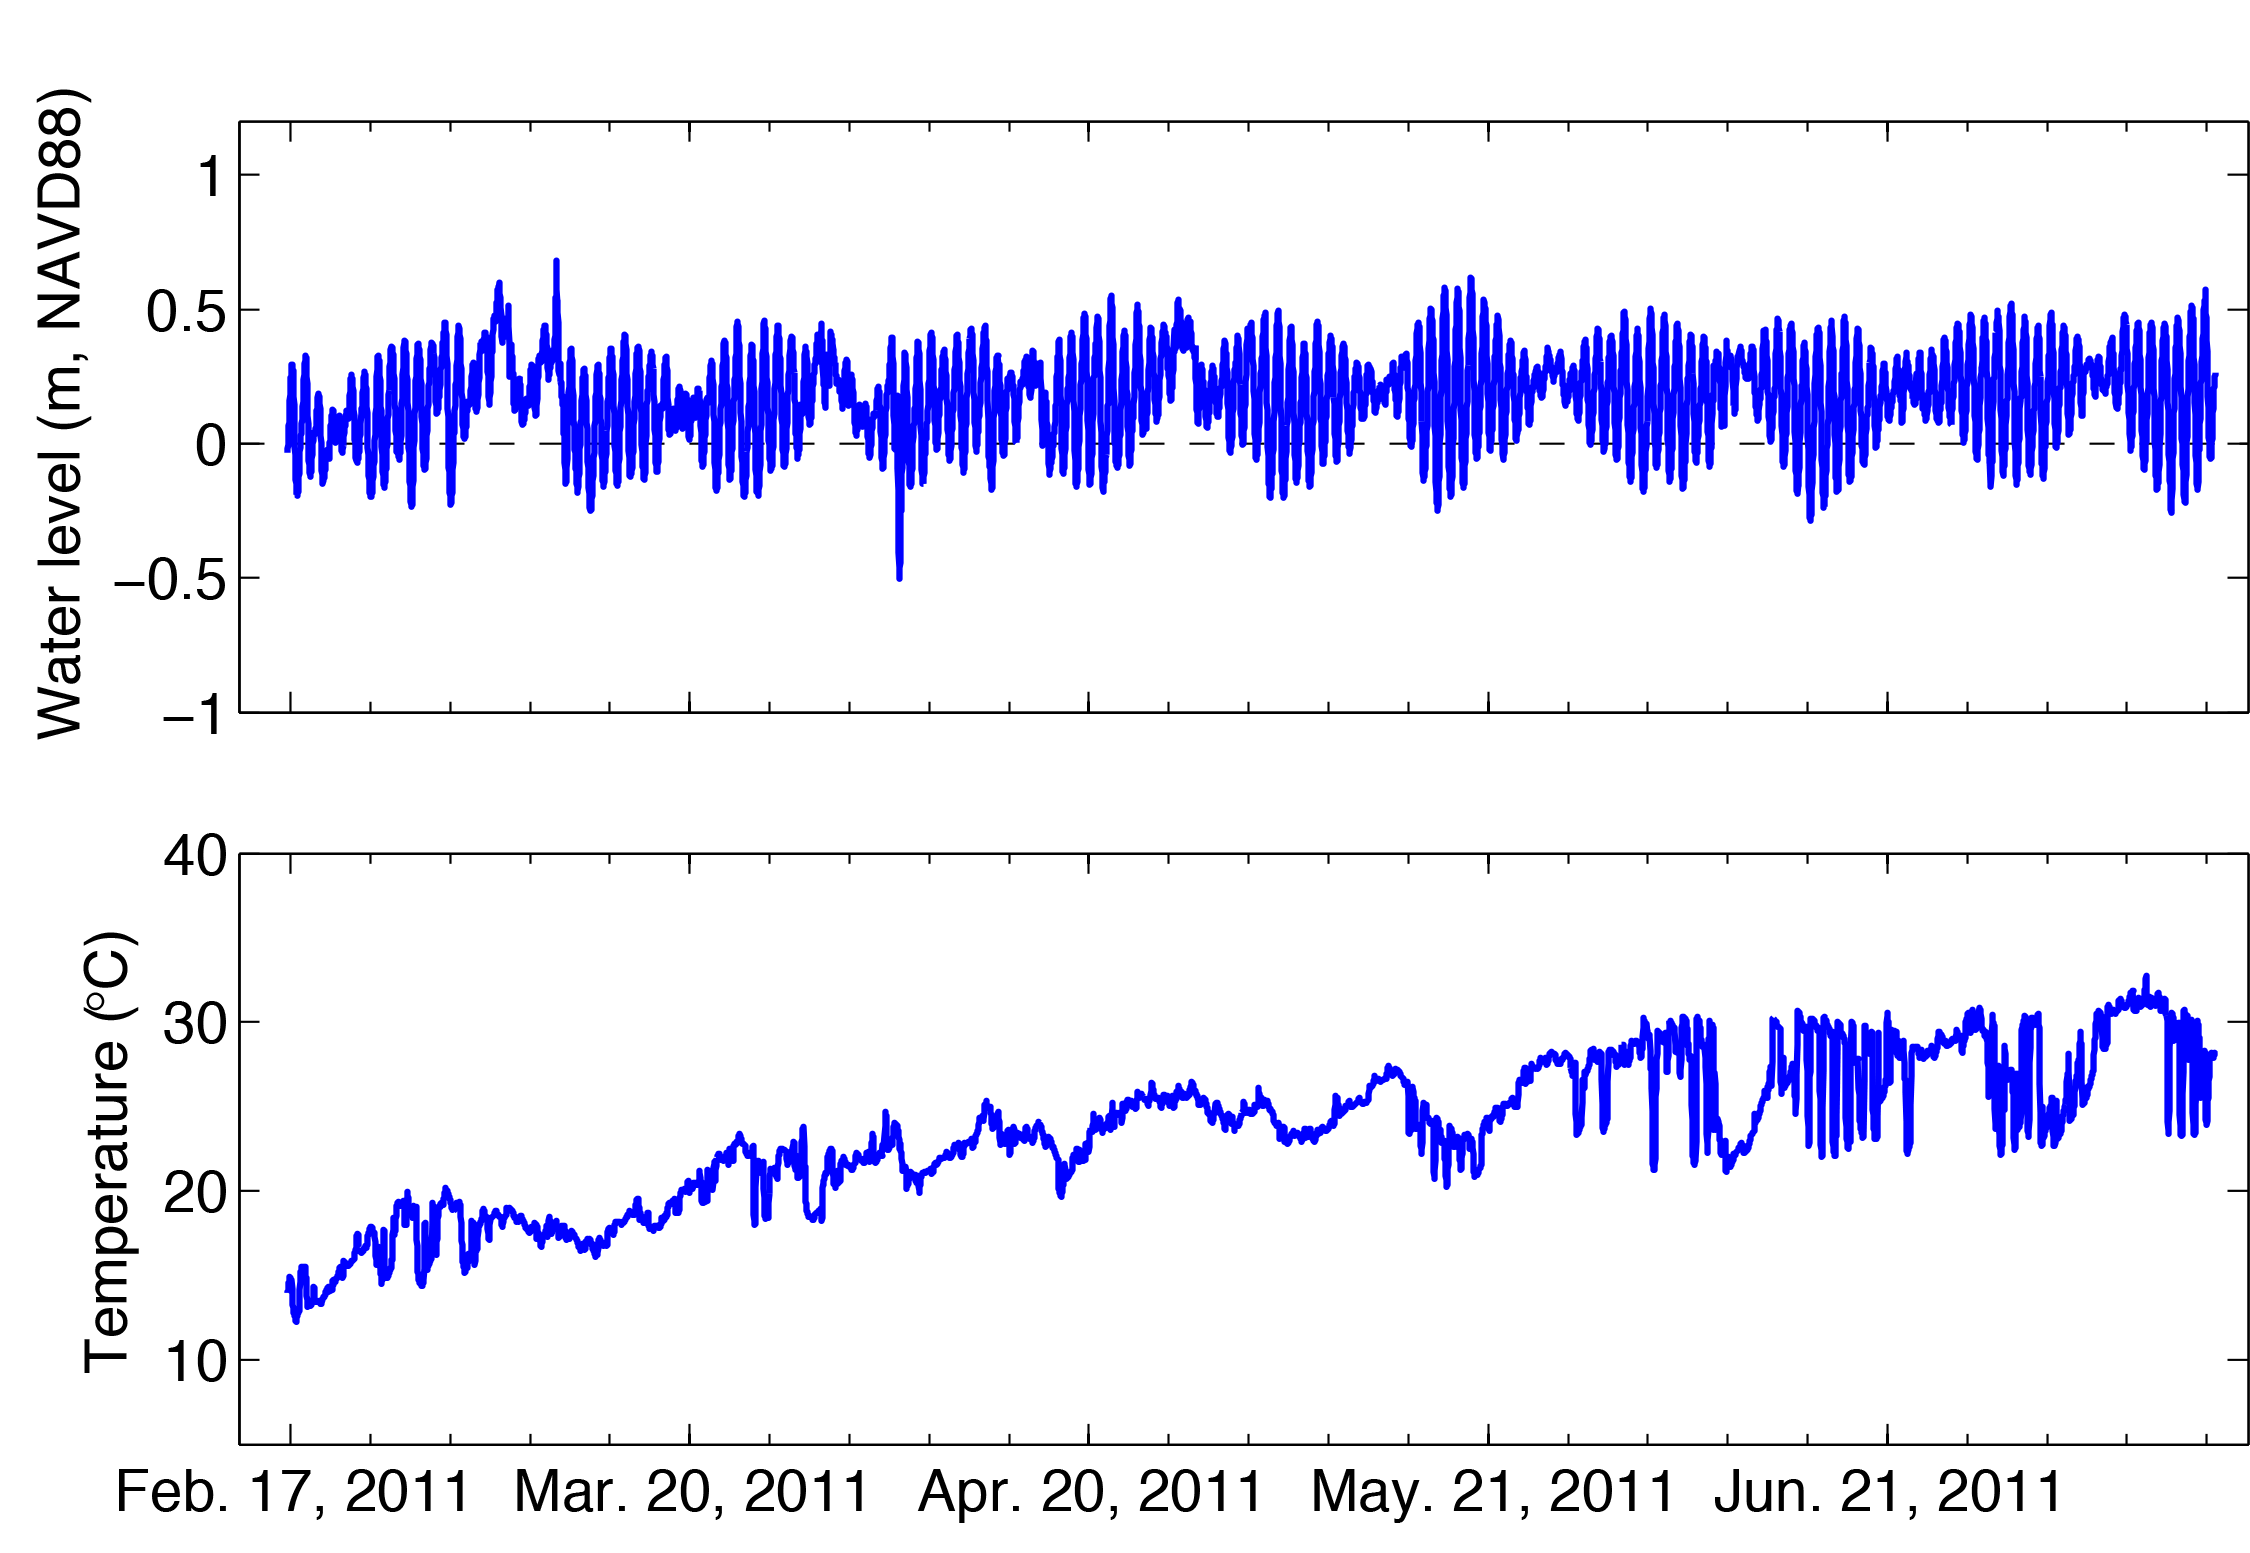 water level and temperature time series